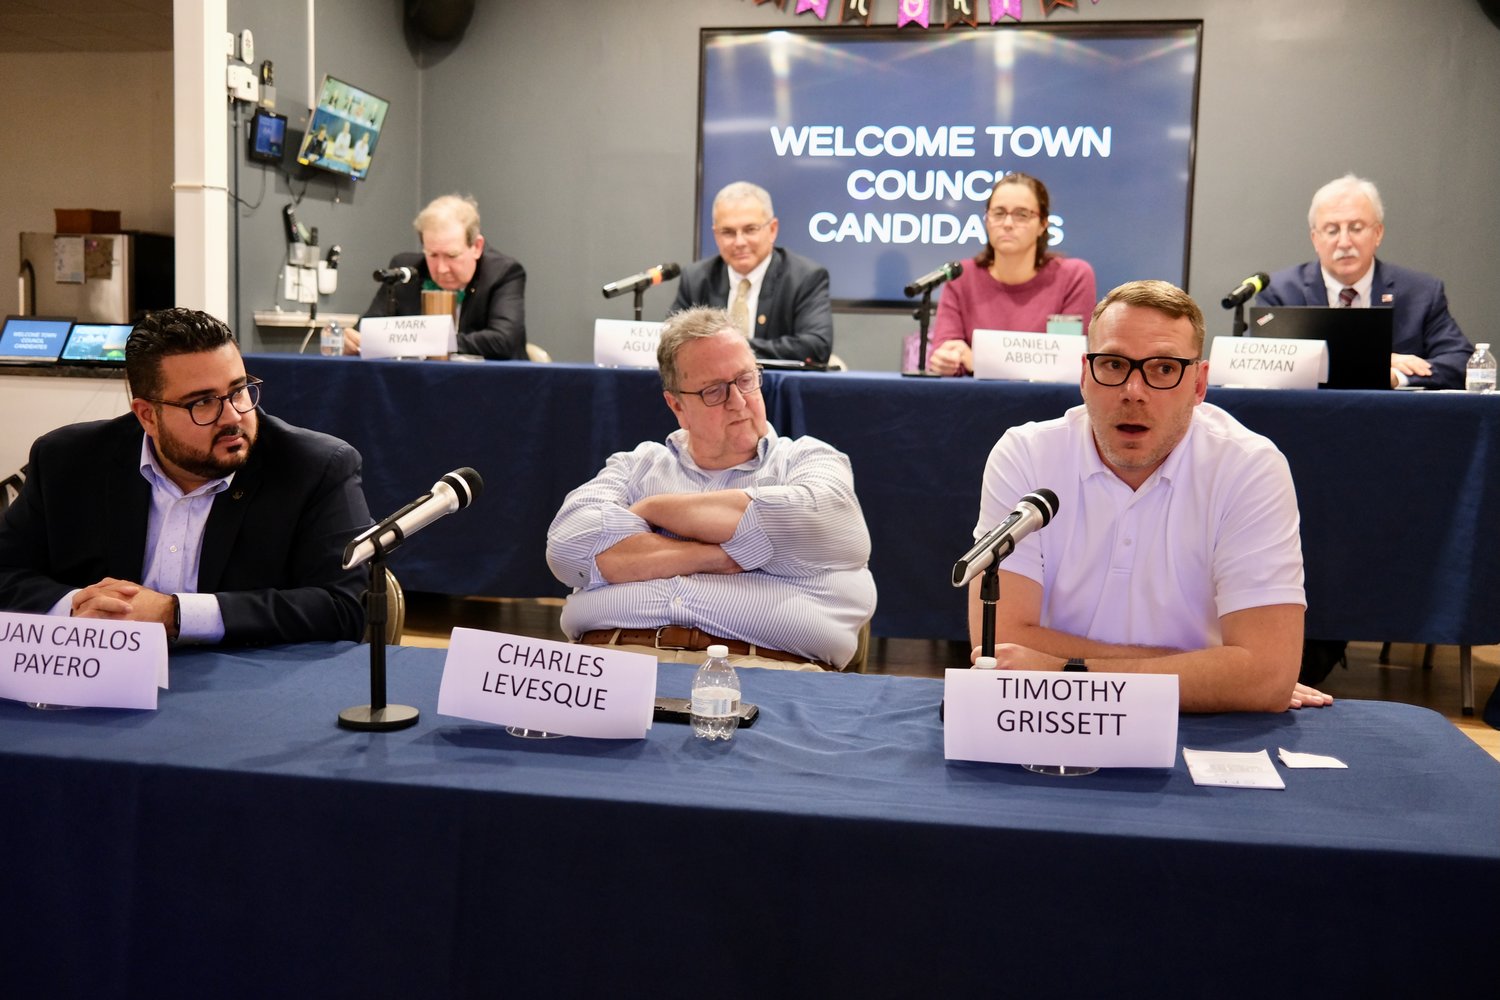 Town Council candidate Timothy Grissett (in front at right) answers a question during Thursday night’s Portsmouth Town Council candidates’ forum hosted by the League of Women Voters of Newport County at the CFP Arts, Wellness, and Community Center. The other candidates here, all Democrats, are (front, from left) Juan Carlos Payero and Charles Levesque; and (back, from left) J. Mark Ryan, Kevin Aguiar, Daniela Abbott, and Leonard Katzman. The four Republican candidates and the one independent did not attend the forum.